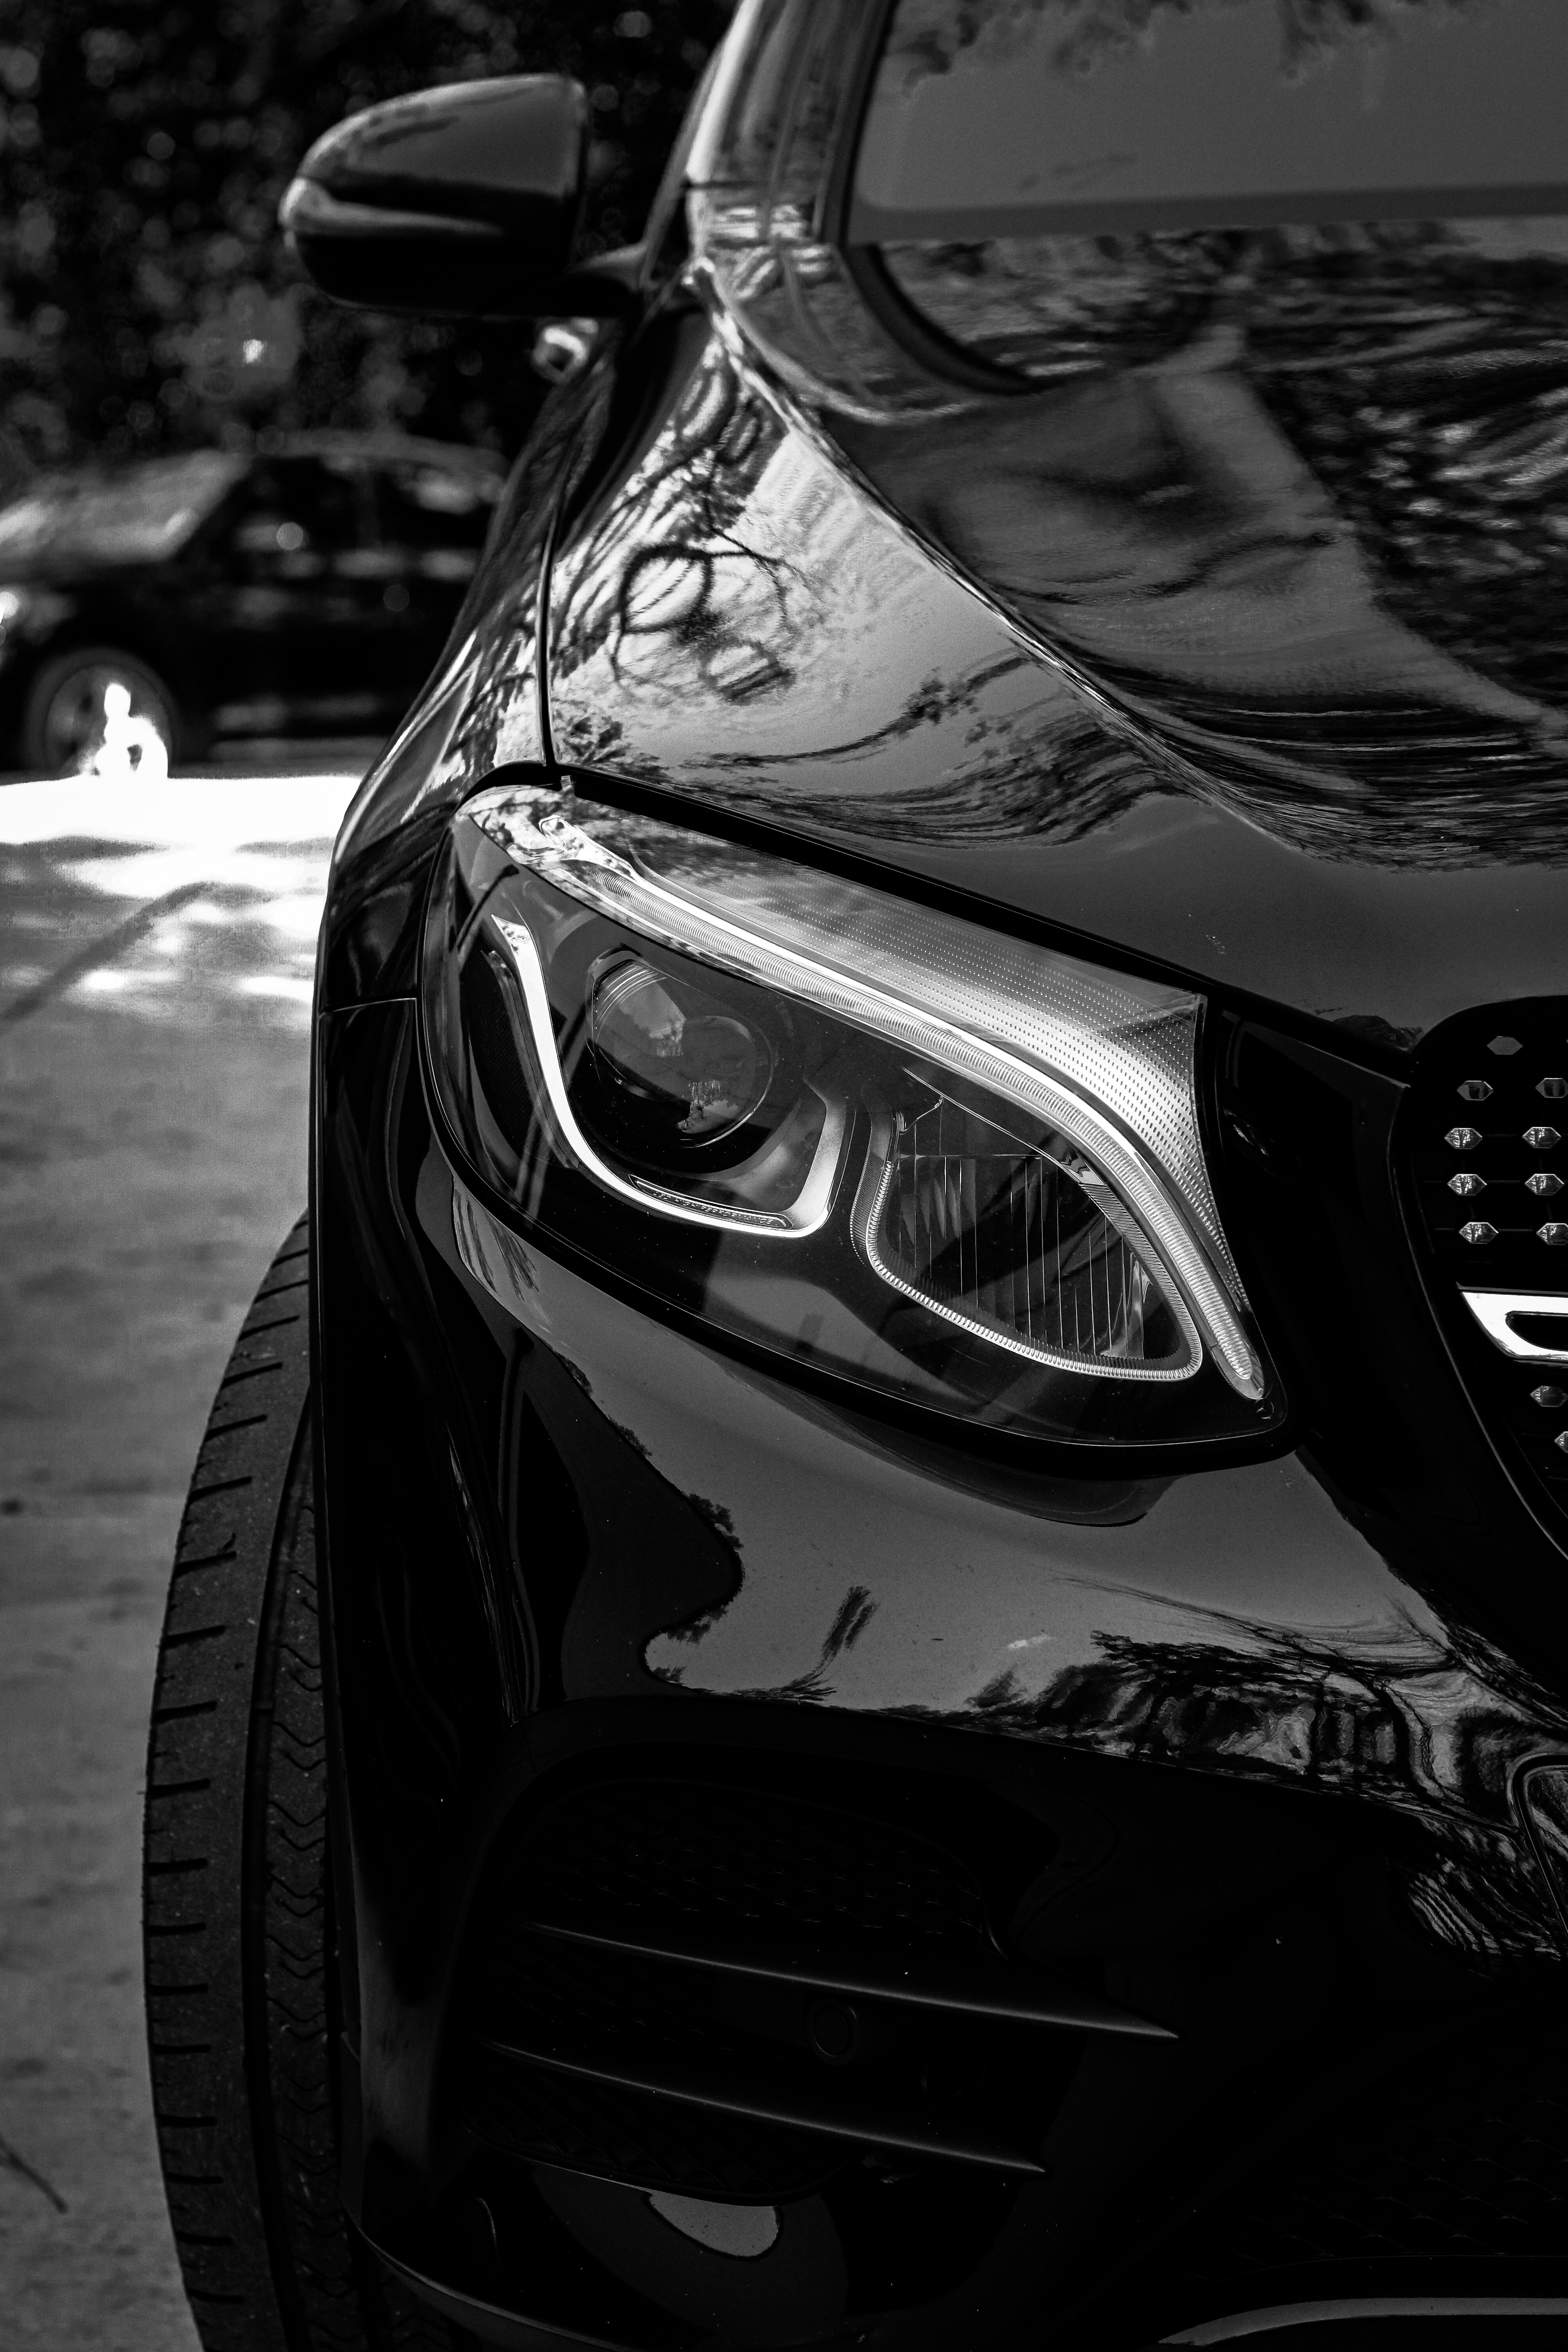 Download background car, cars, black, front view, machine, bw, chb, headlight